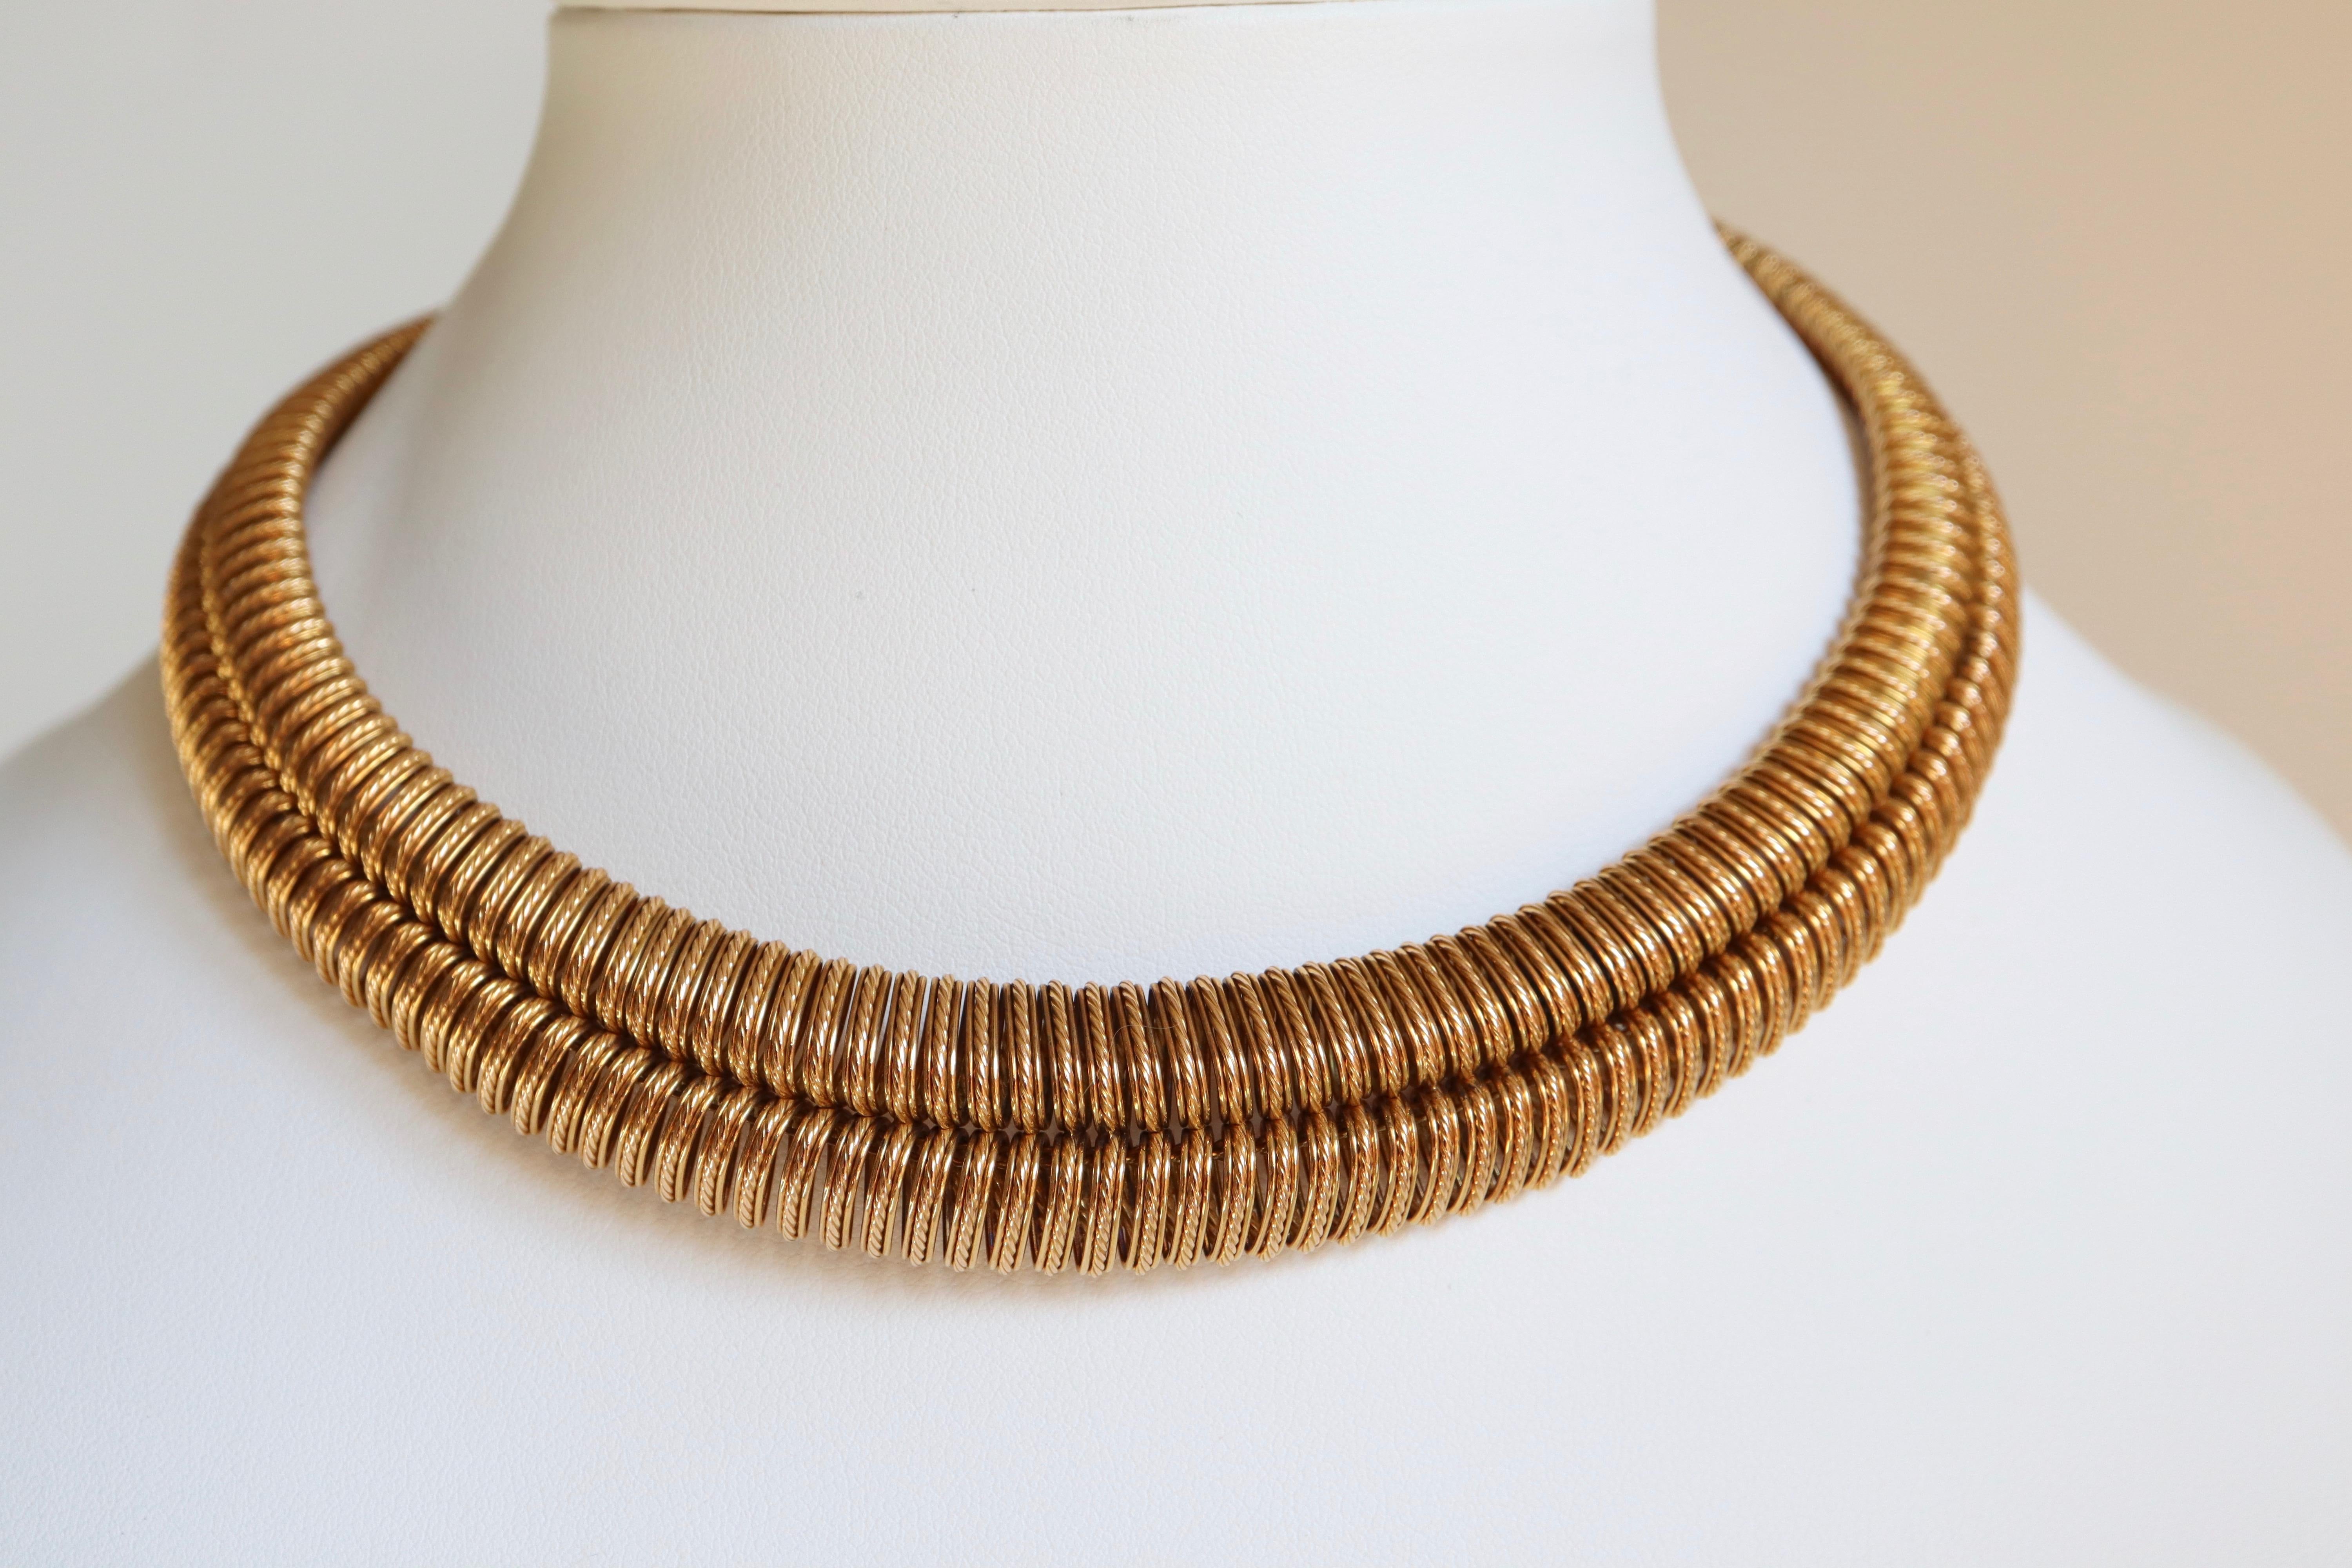 MARCHAK 18 Carat yellow Gold choker Necklace double twisted Mesh coiled semi-rigid Spring
Clasp with safety Tab
Signed: MARCHAK PARIS and numbered
Diameter: 12 cm Length: 37 cm 
Width in the widest Part: 2cm
Net Weight: 96 g